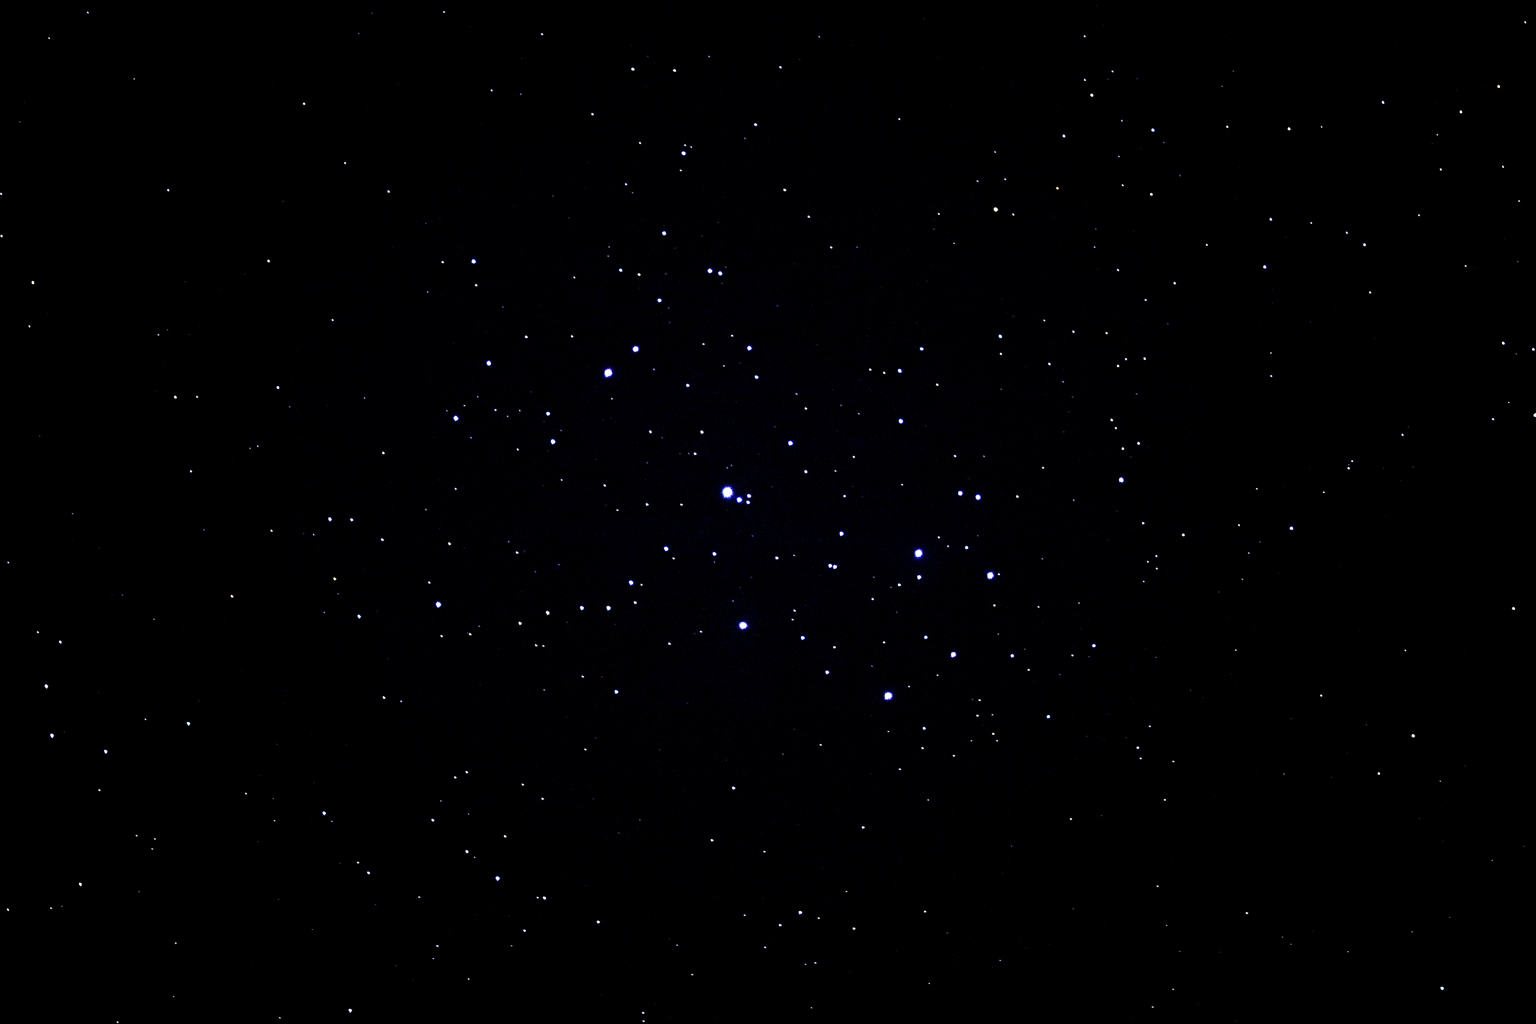 M45 - The Pleiades also known as the Seven Sisters and also known as Subaru